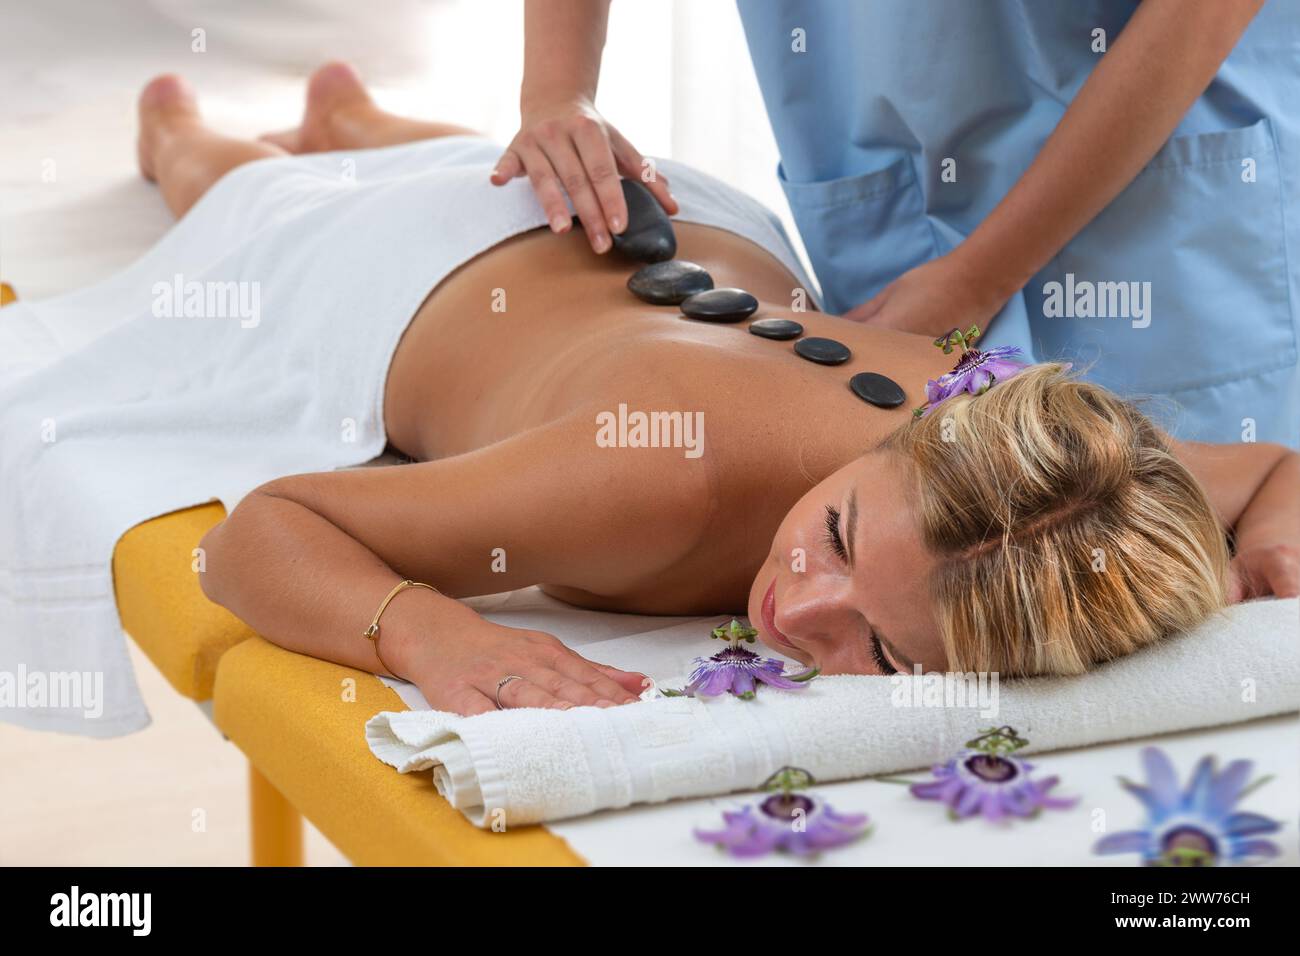 View from above - The masseur positions the basalt pebbles in the center of the young woman's back. Stock Photo